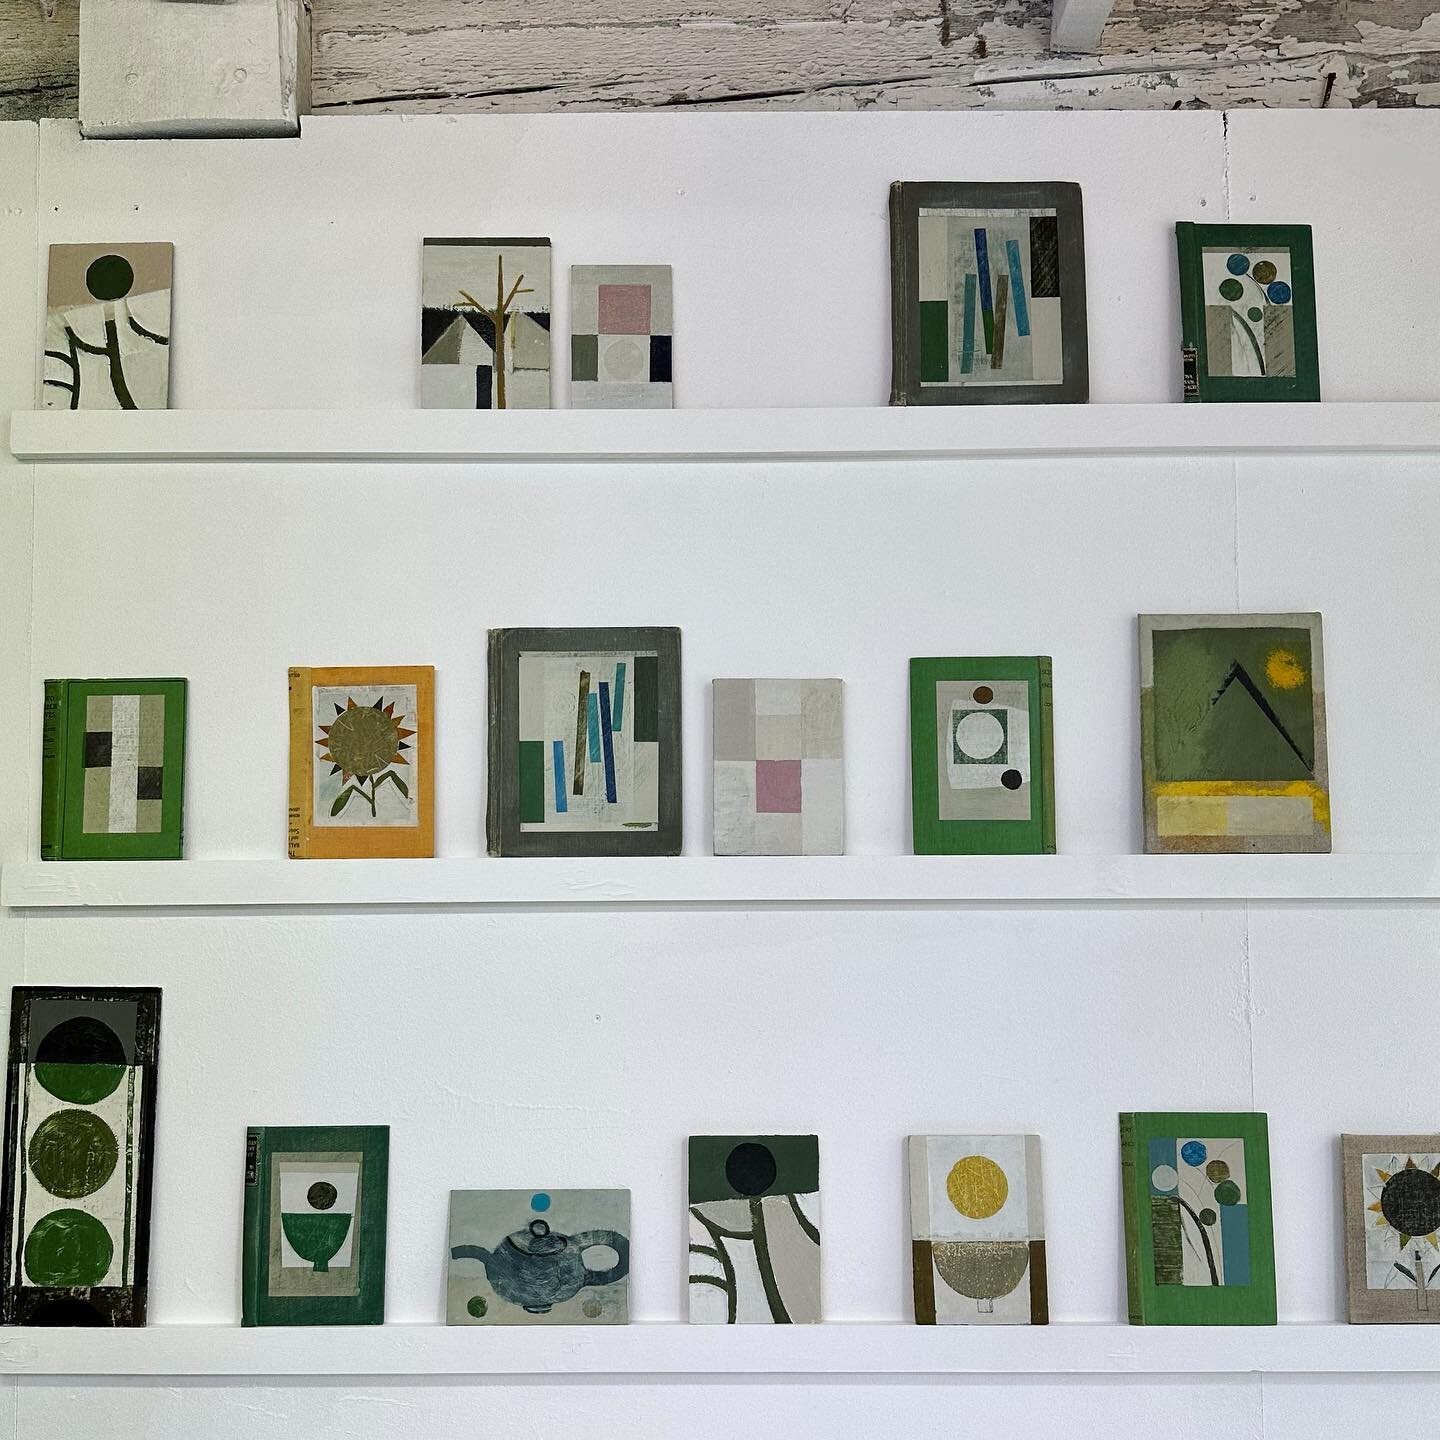 The wonderful work of @daisycookartist discovered at the Summer Open Studios @kingsgateworkshops.

#interiors #interiordesign #interiordesigner #interiorinspiration  #interiorinspo #londoninteriors #londoninteriordesign #londoninteriordesigner #artan